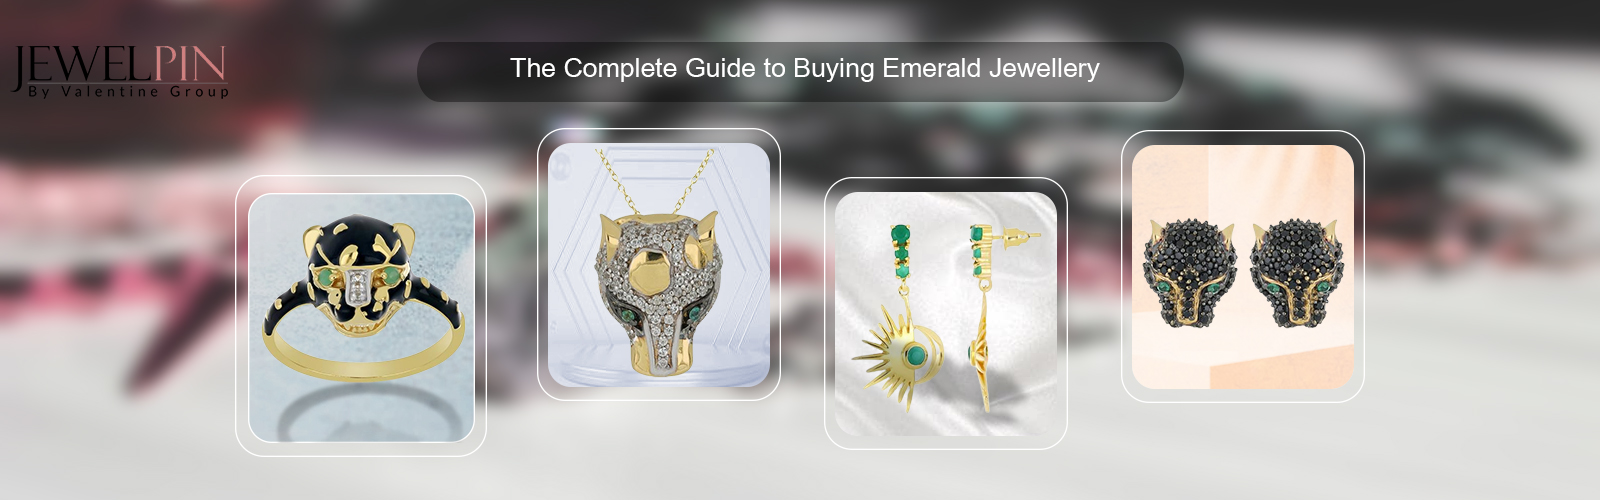 the complete guide to buying emerald jewellery what you need to know